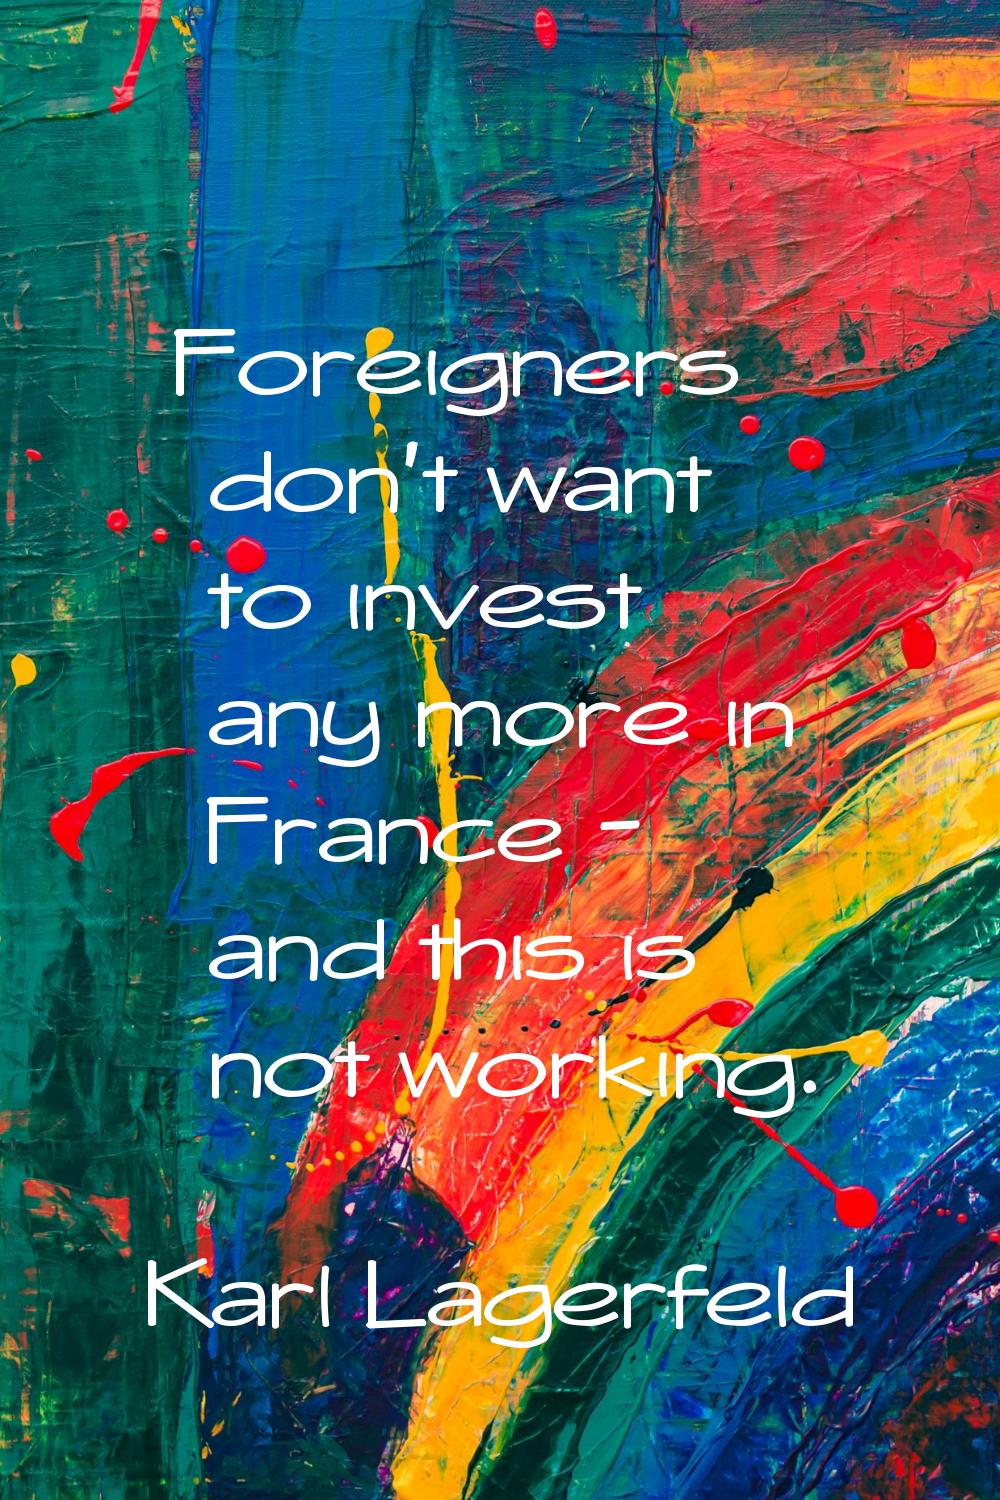 Foreigners don't want to invest any more in France - and this is not working.